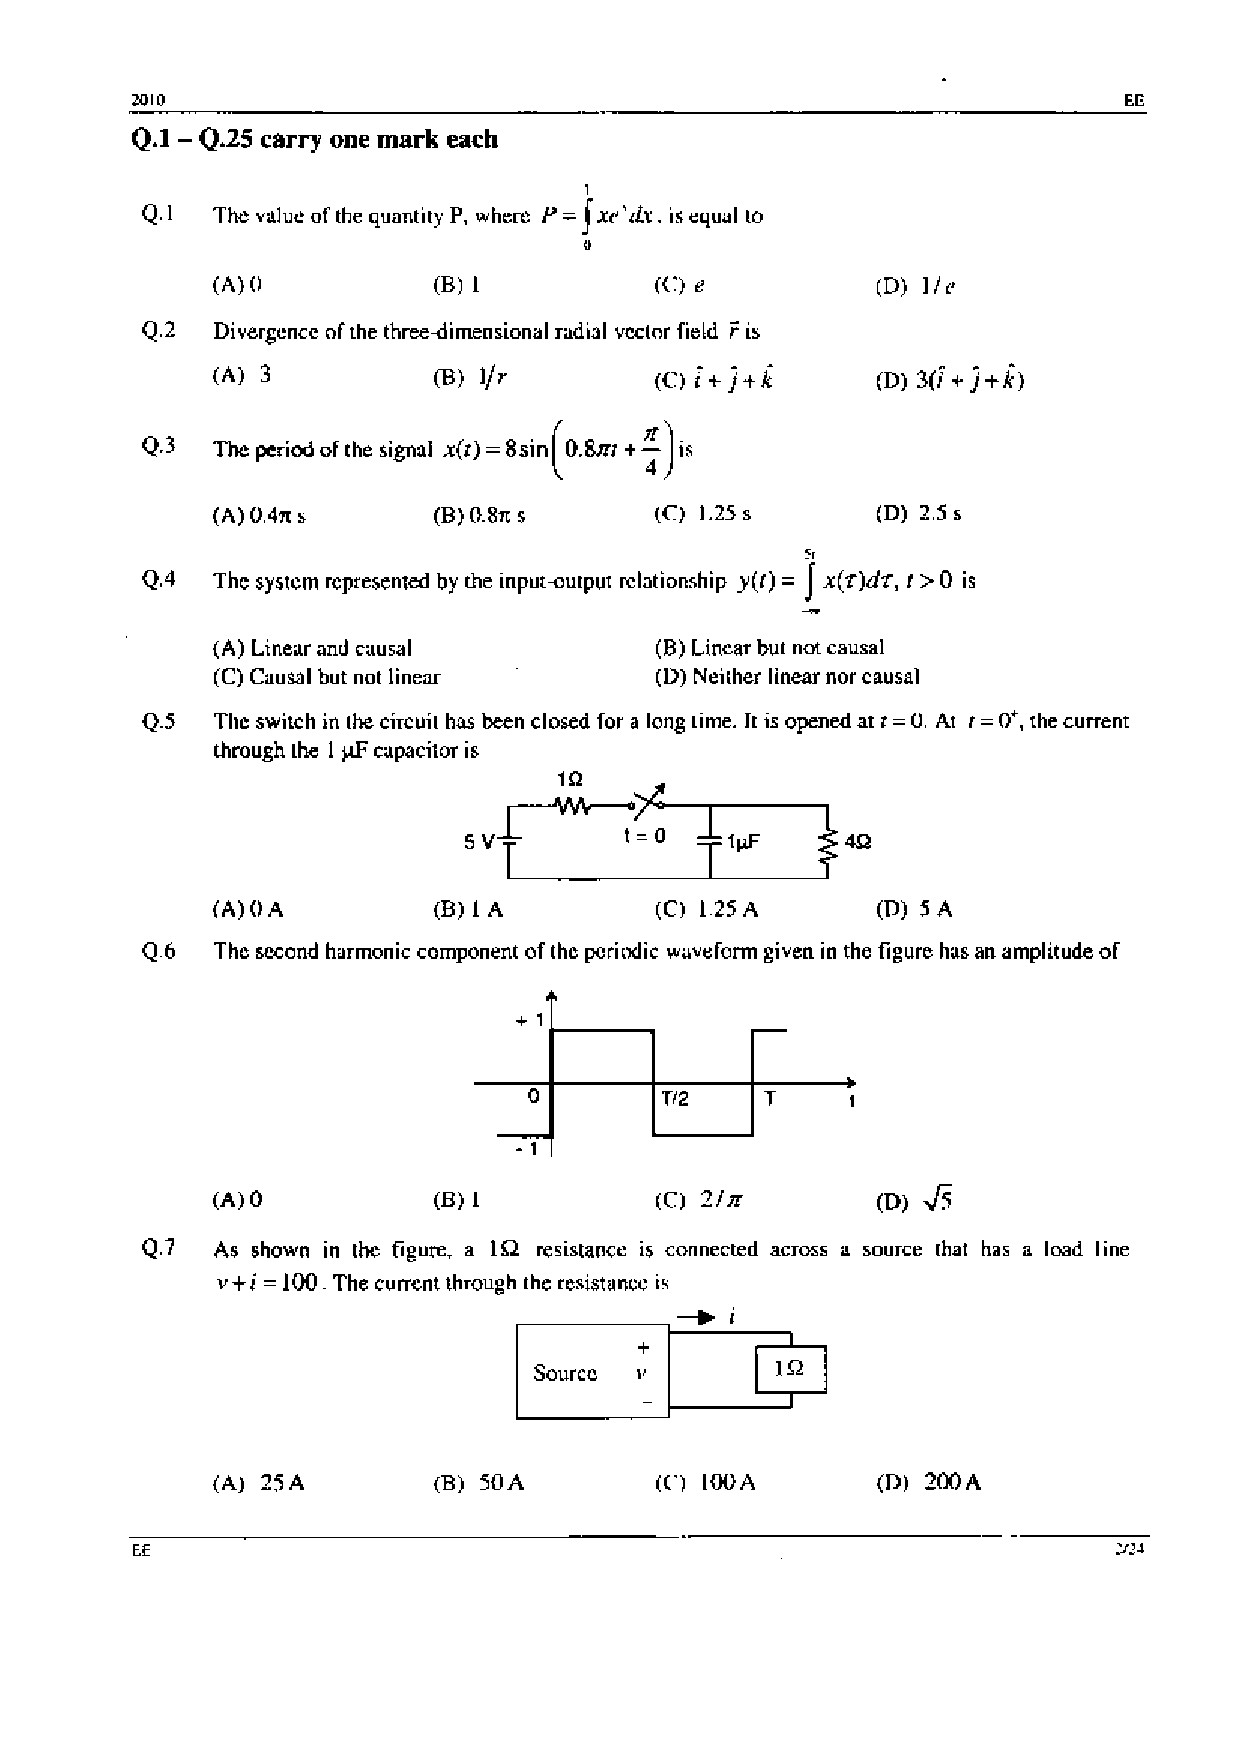 GATE Exam Question Paper 2010 Electrical Engineering 2